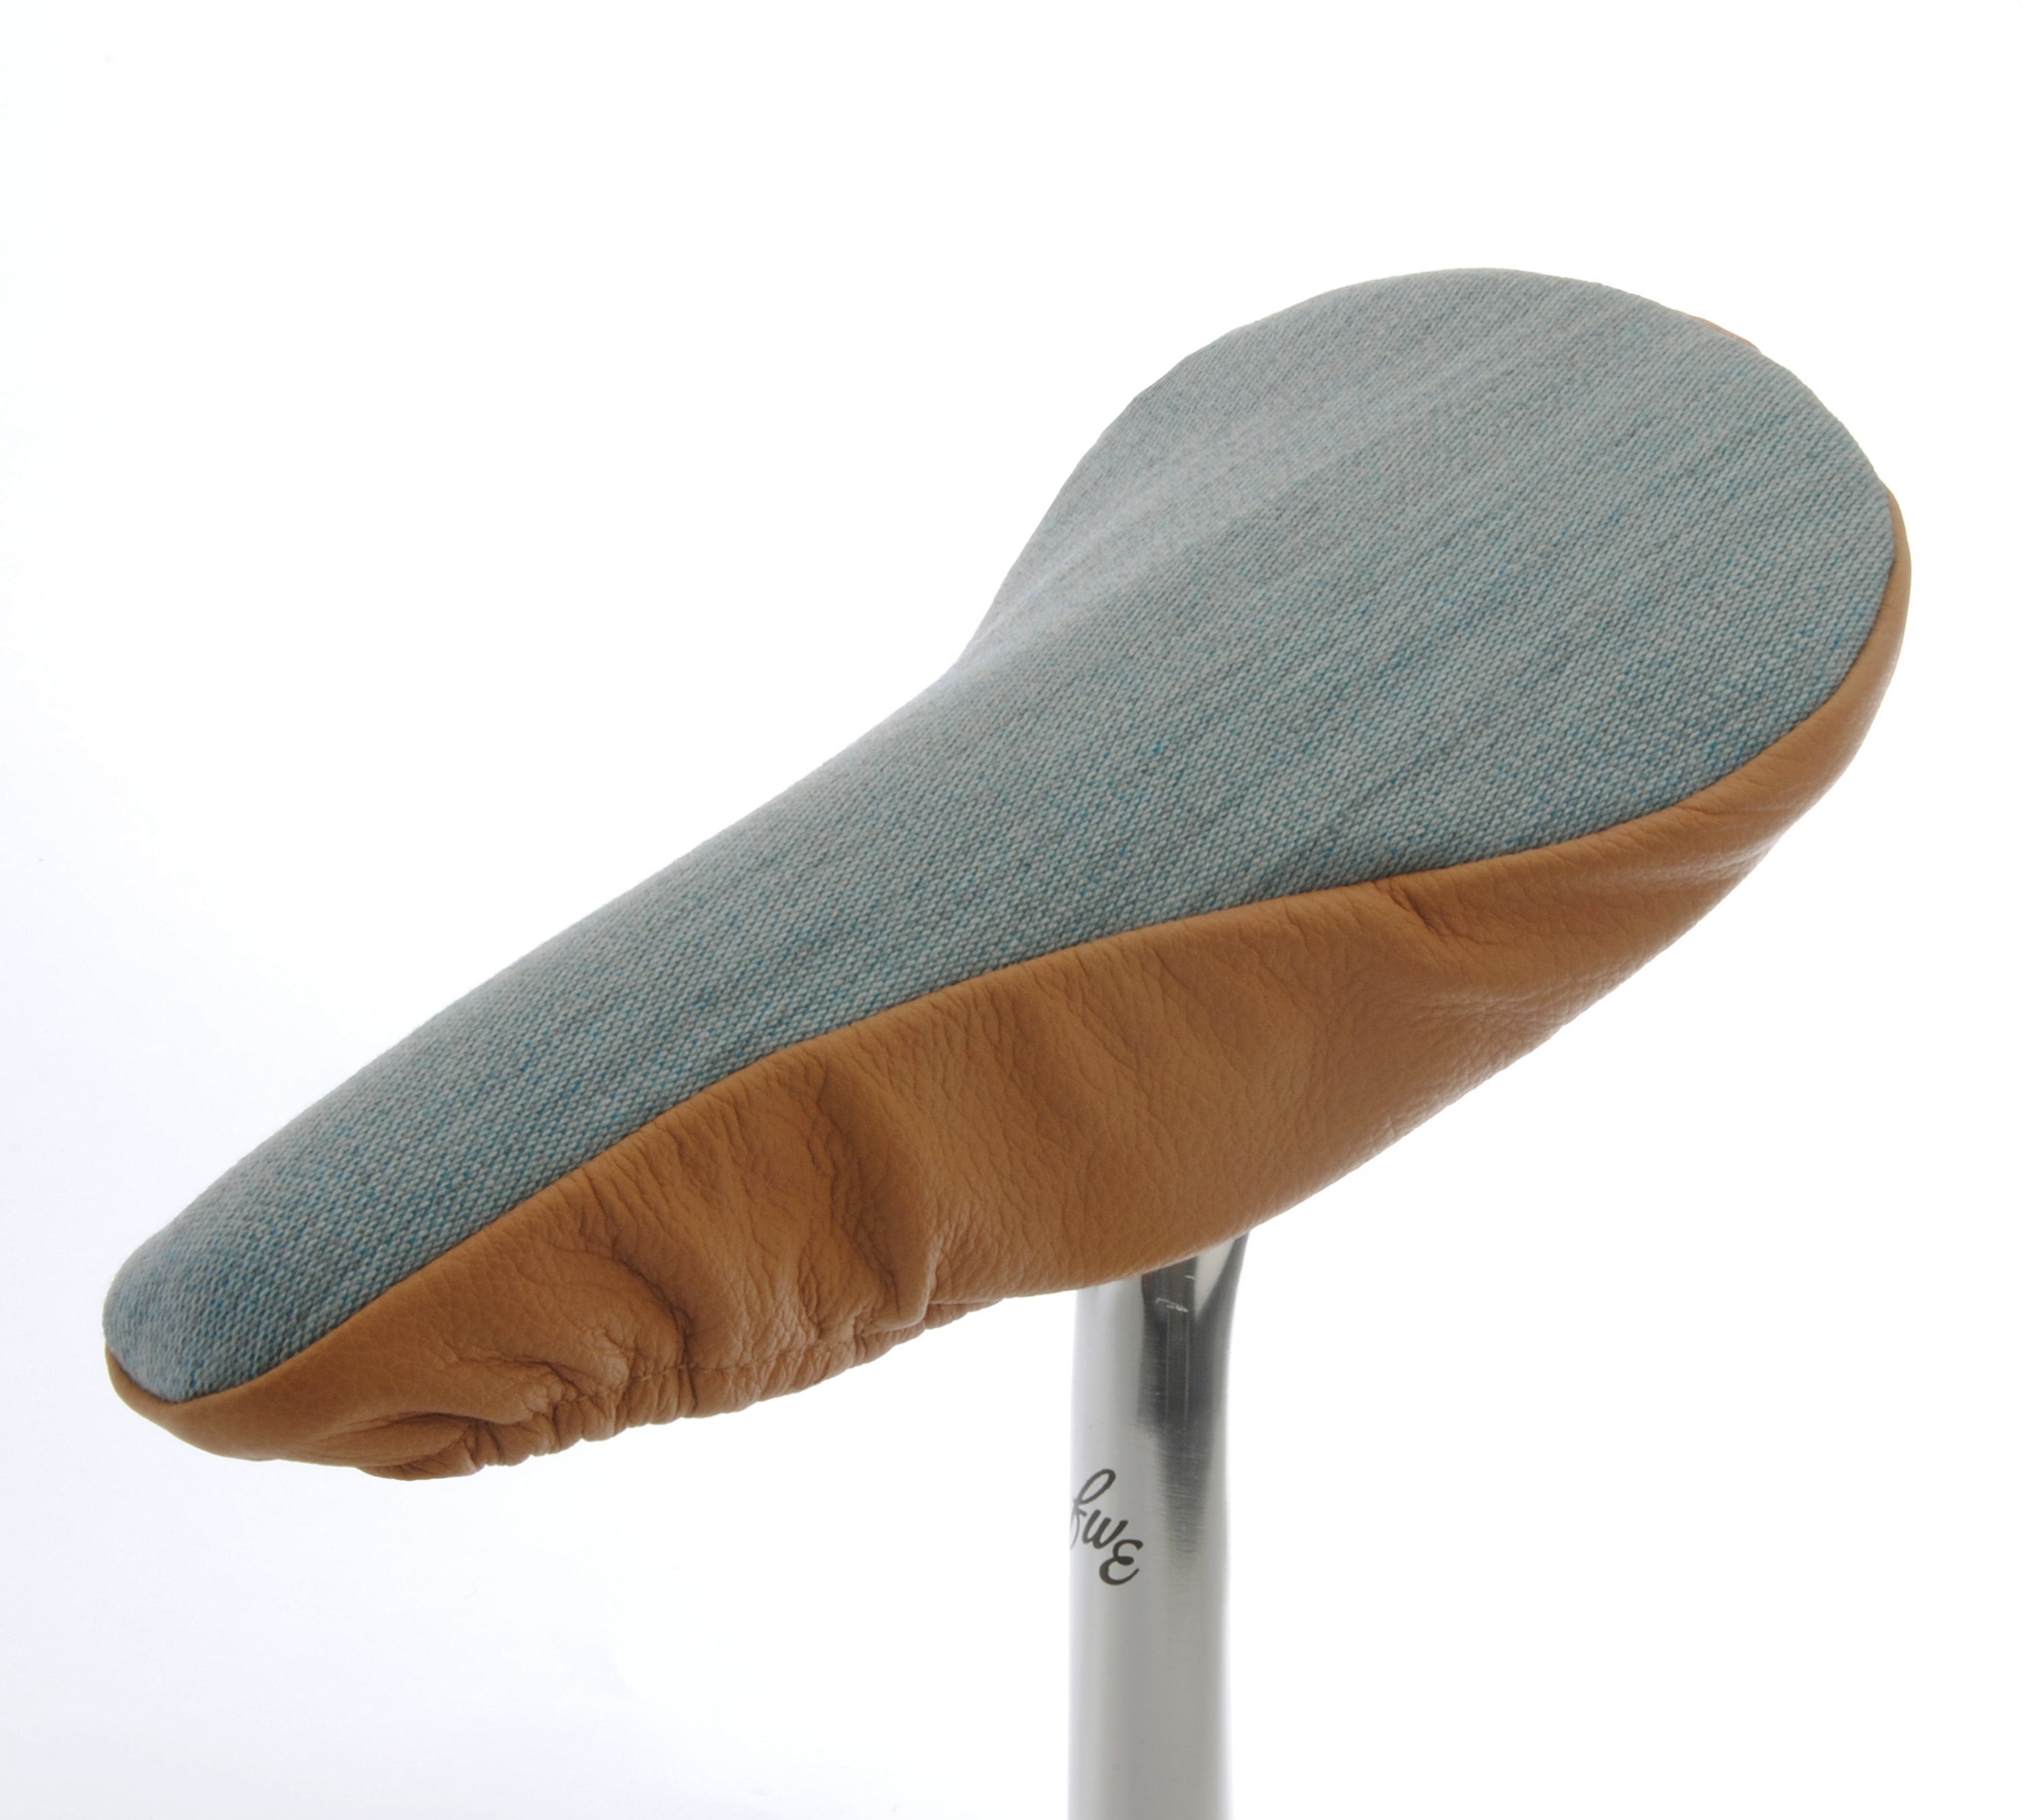 Smooth Blue Saddle Cover - Pale Blue with Beige Leather